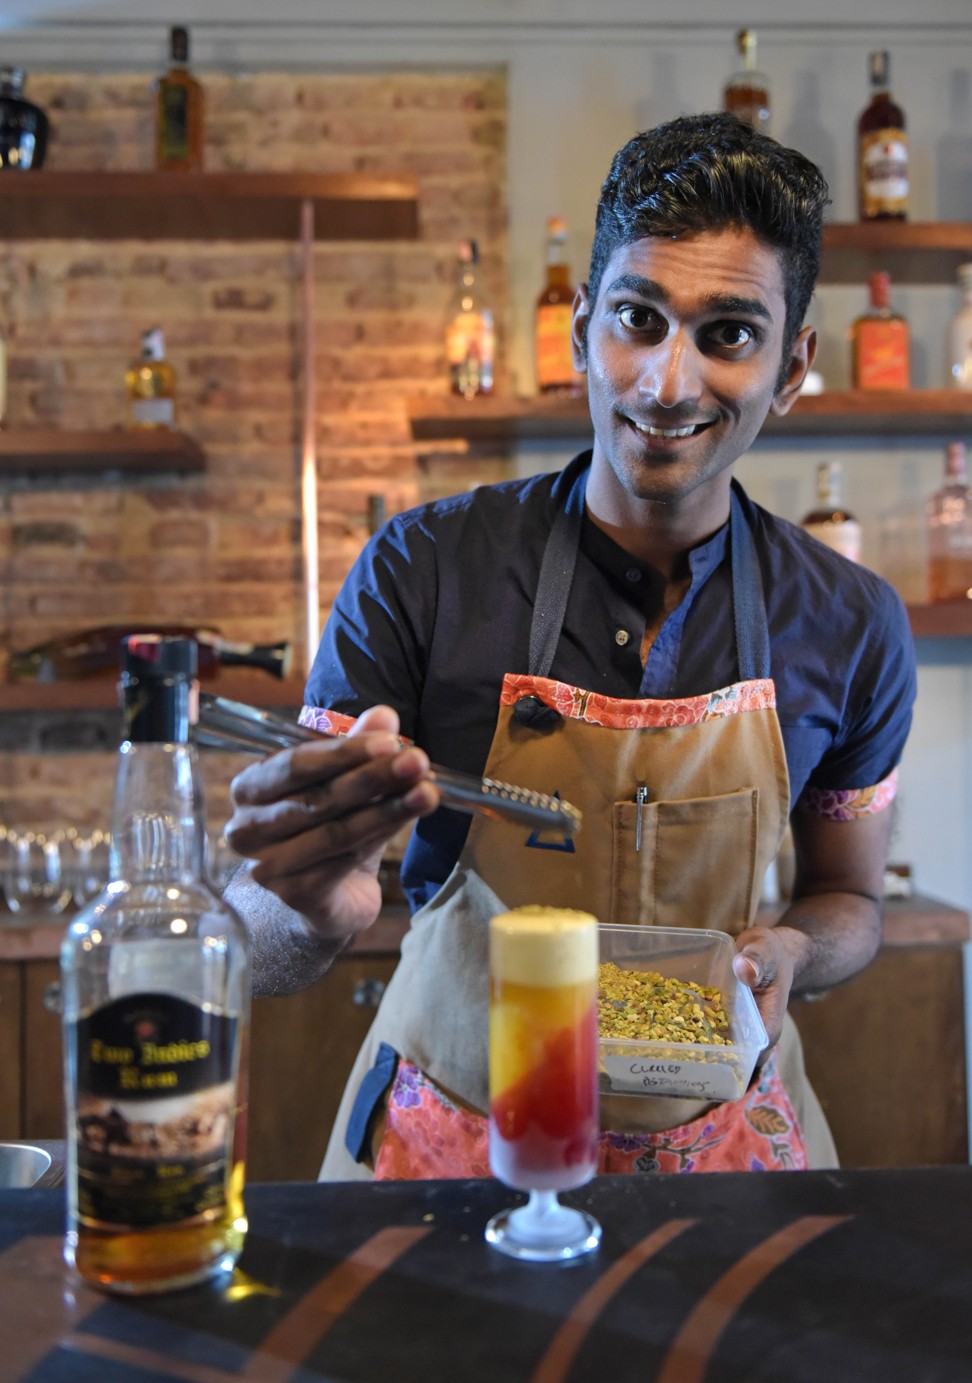 Vijay Mudaliar, head bartender of Native, preparing a Mango Lassi, which includes hand-puréed Indian mangoes, Amrut Old Port rum, beetroot jelly, pomegranate molasses and pistachios. Photo: The Straits Times